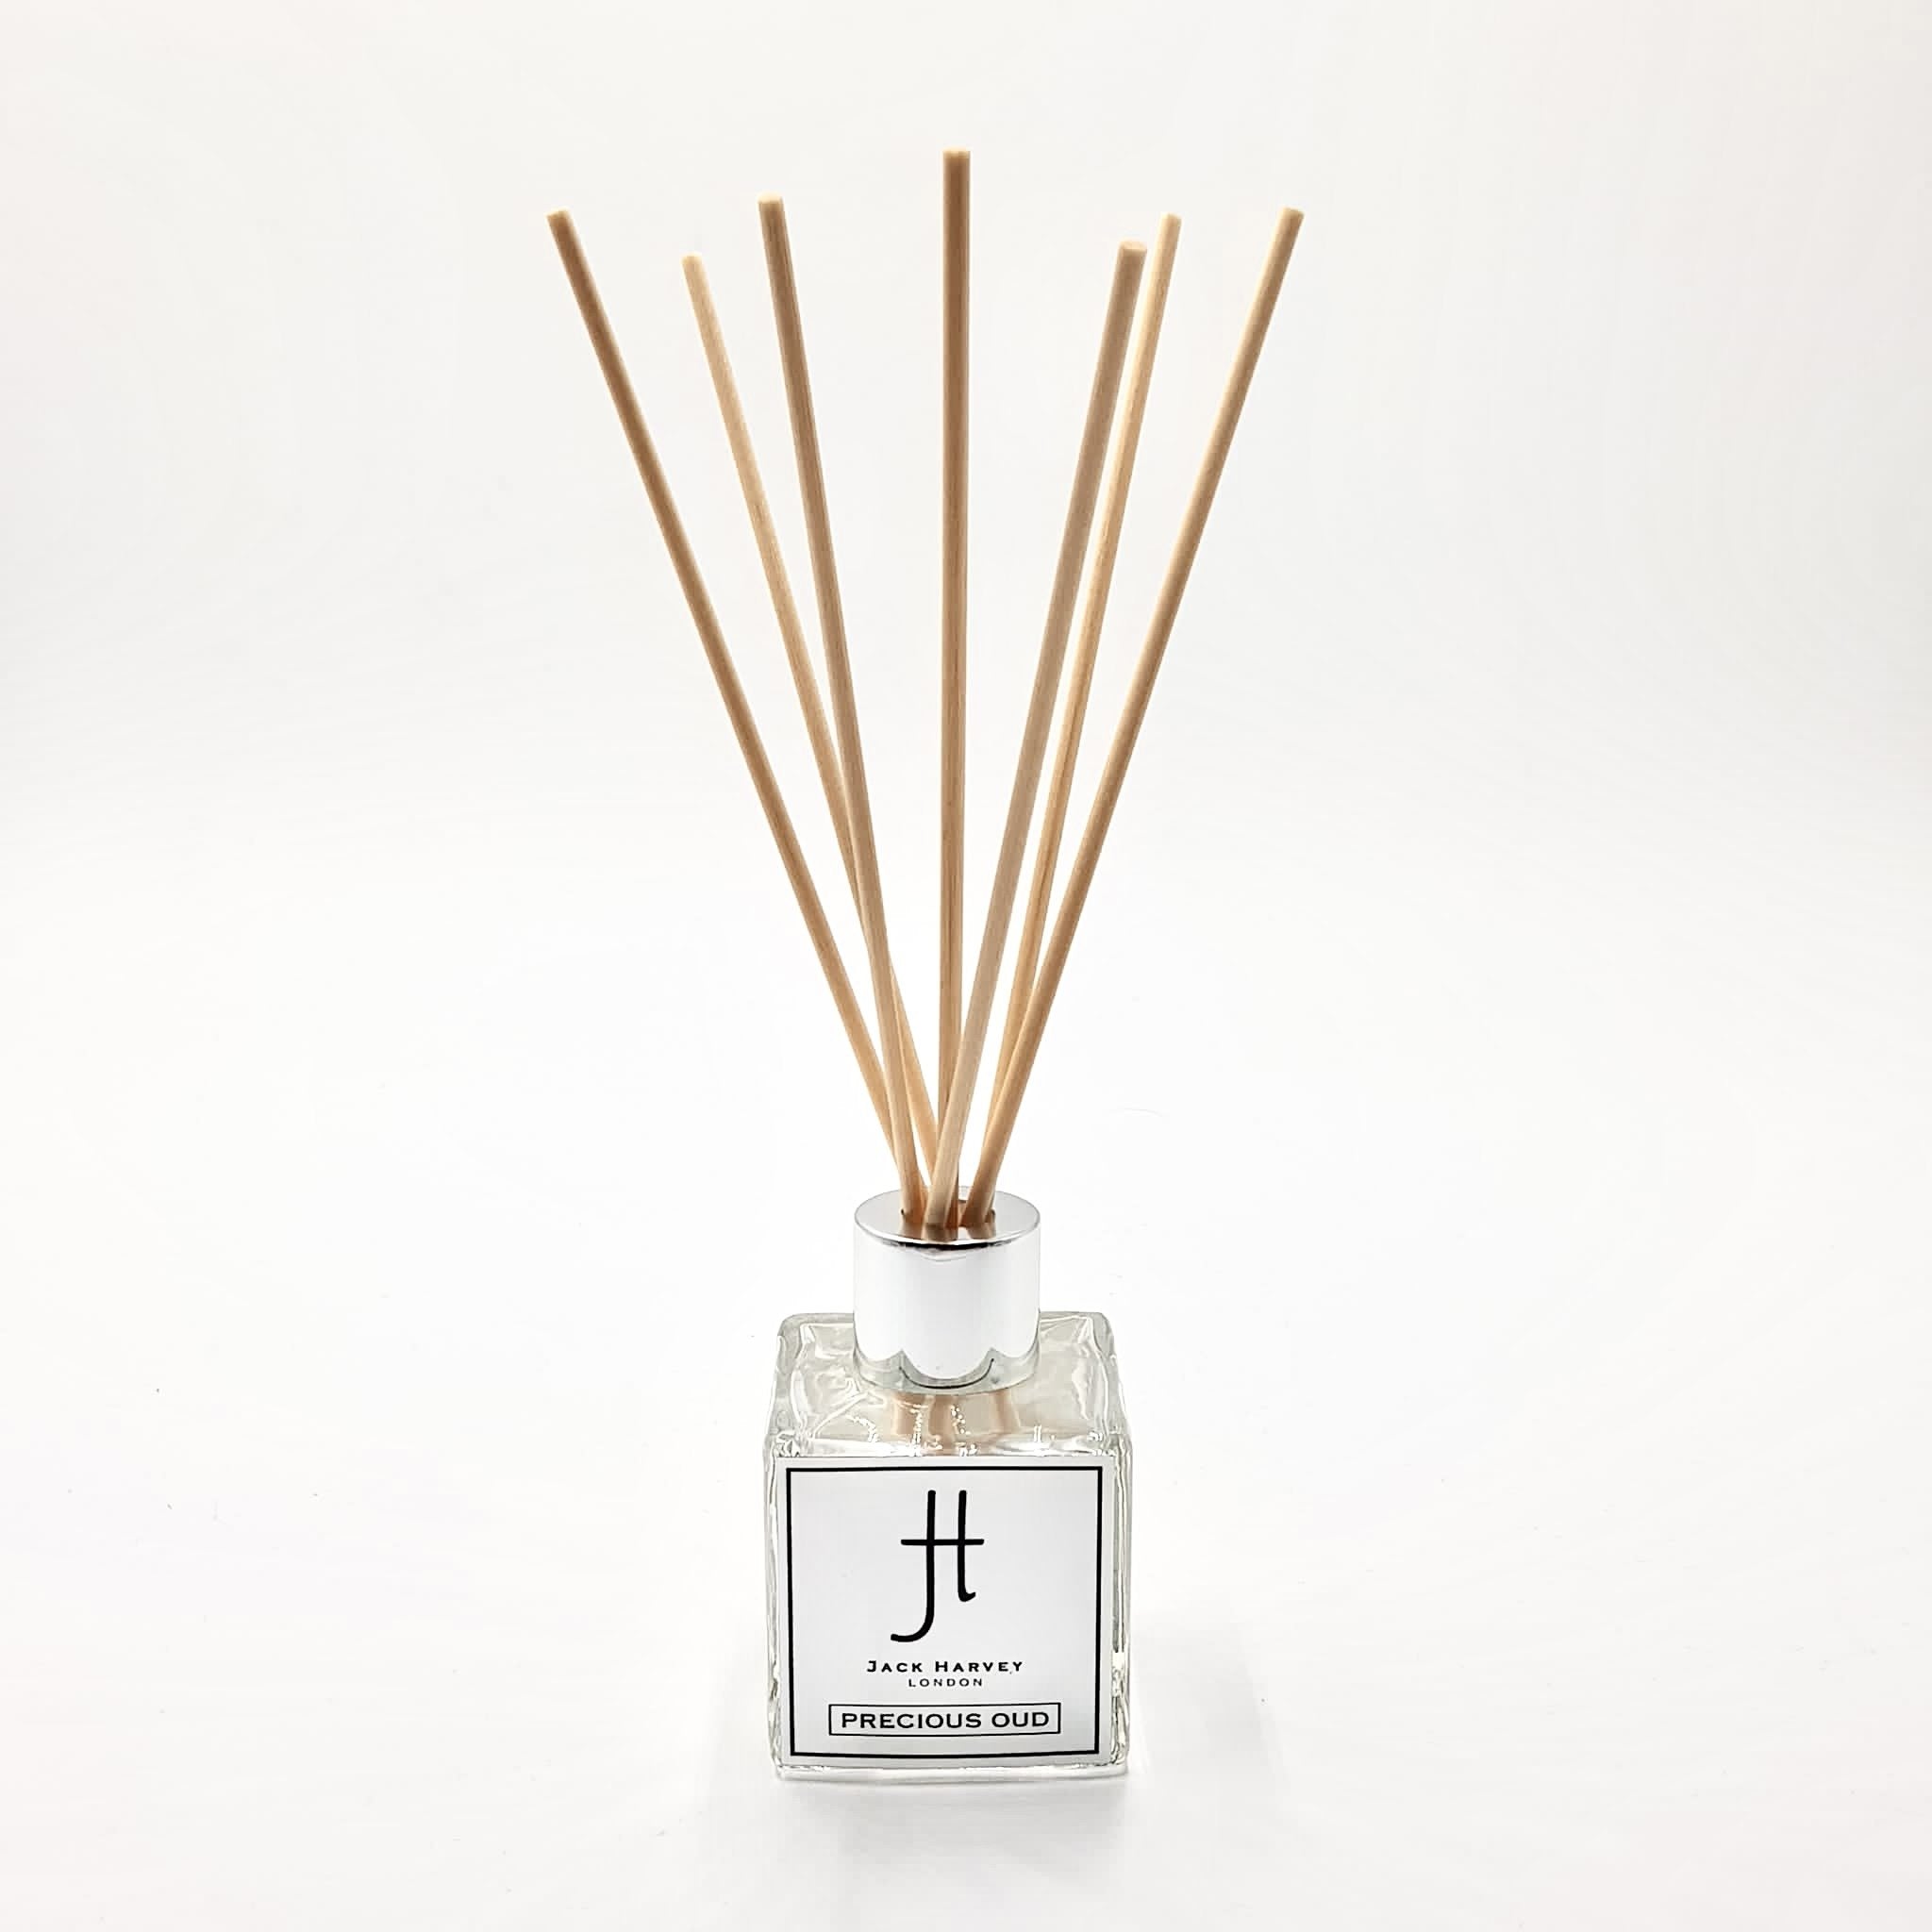 CHELSEA MINI 50ml LIMITED EDITION - LUXURY REED DIFFUSER